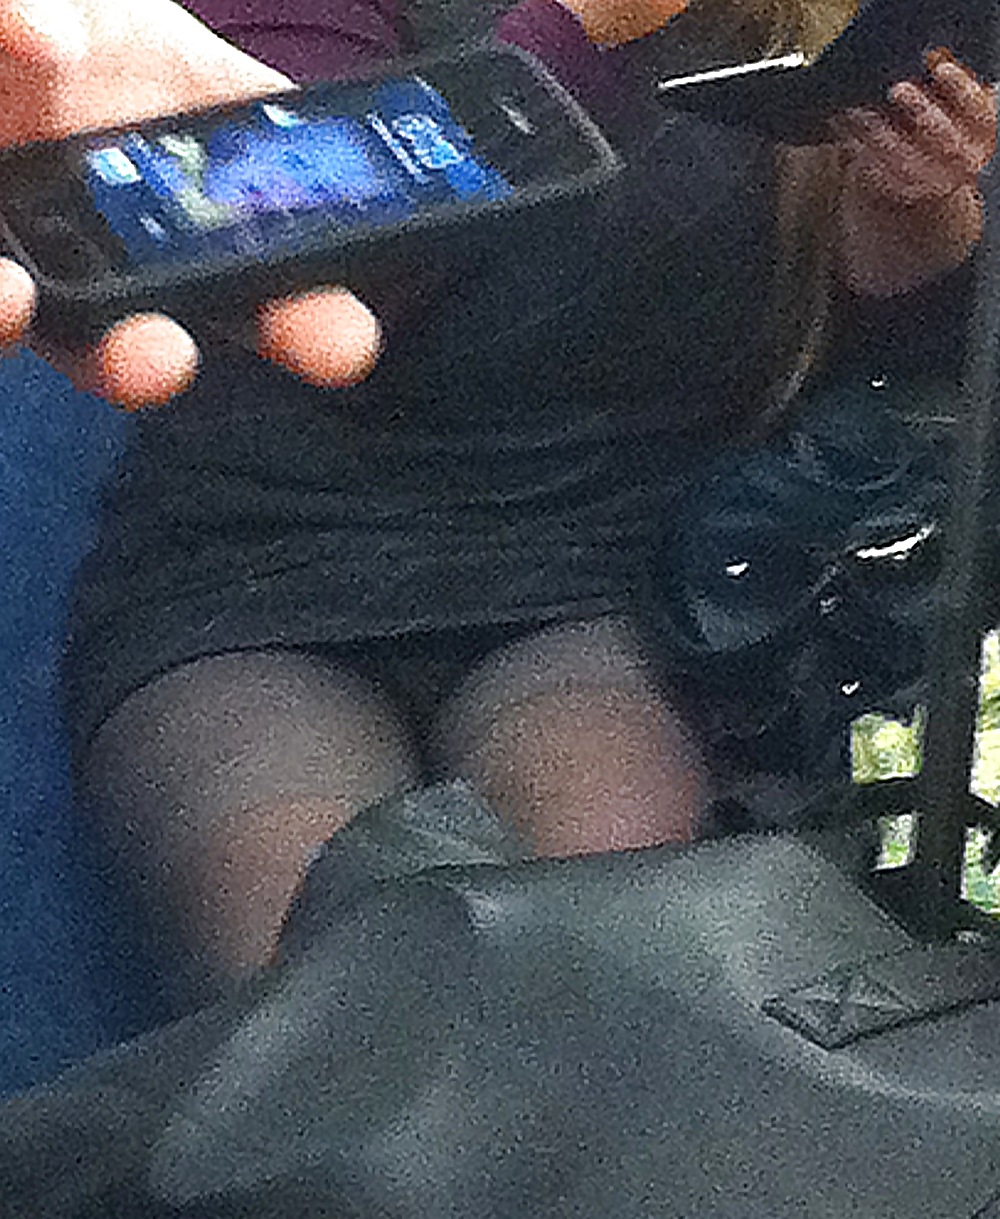 Some chick on the train #3197072